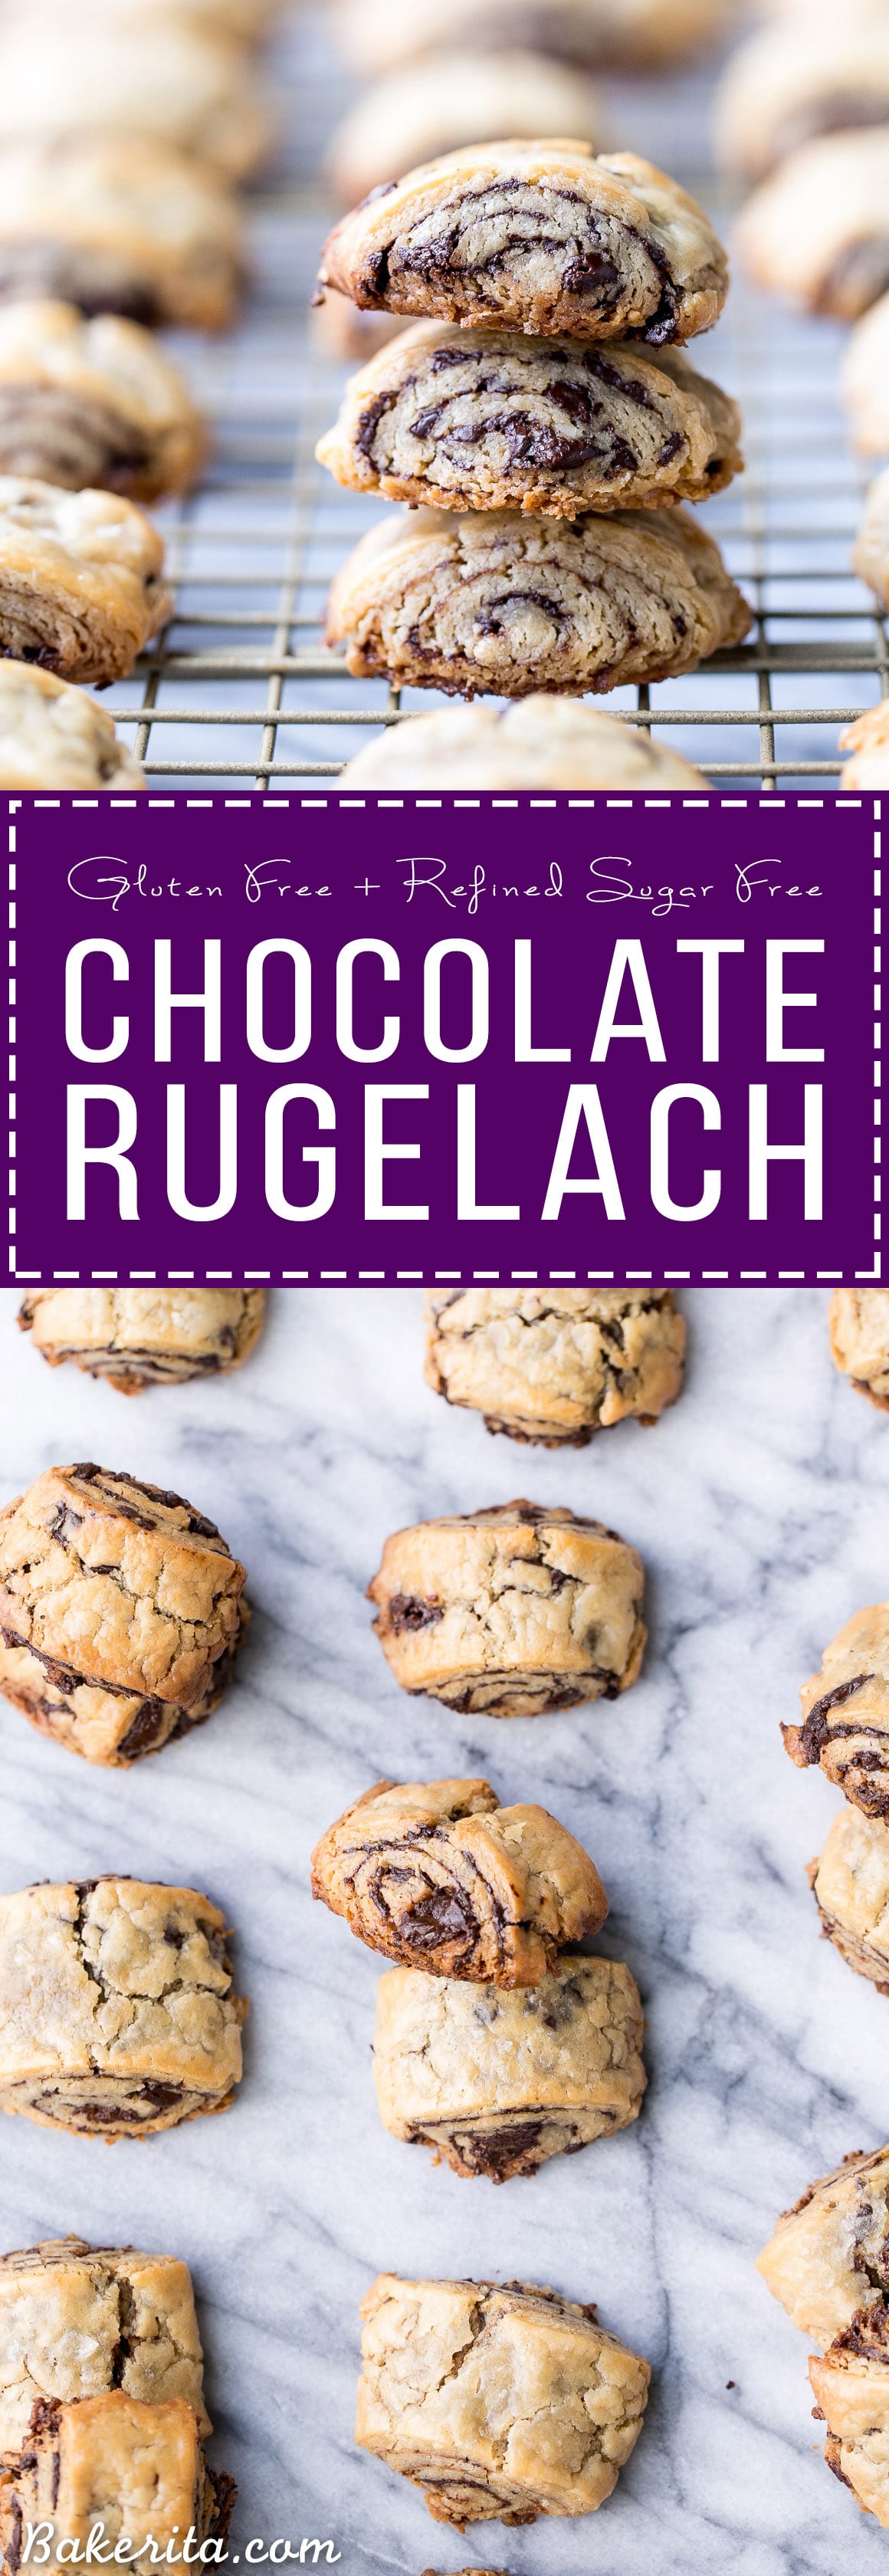 These Chocolate Rugelach are incredibly tender and flaky, thanks to the cream cheese-based dough. These refined sugar-free and gluten-free rugelach are filled with dark chocolate shavings for an irresistible holiday treat.